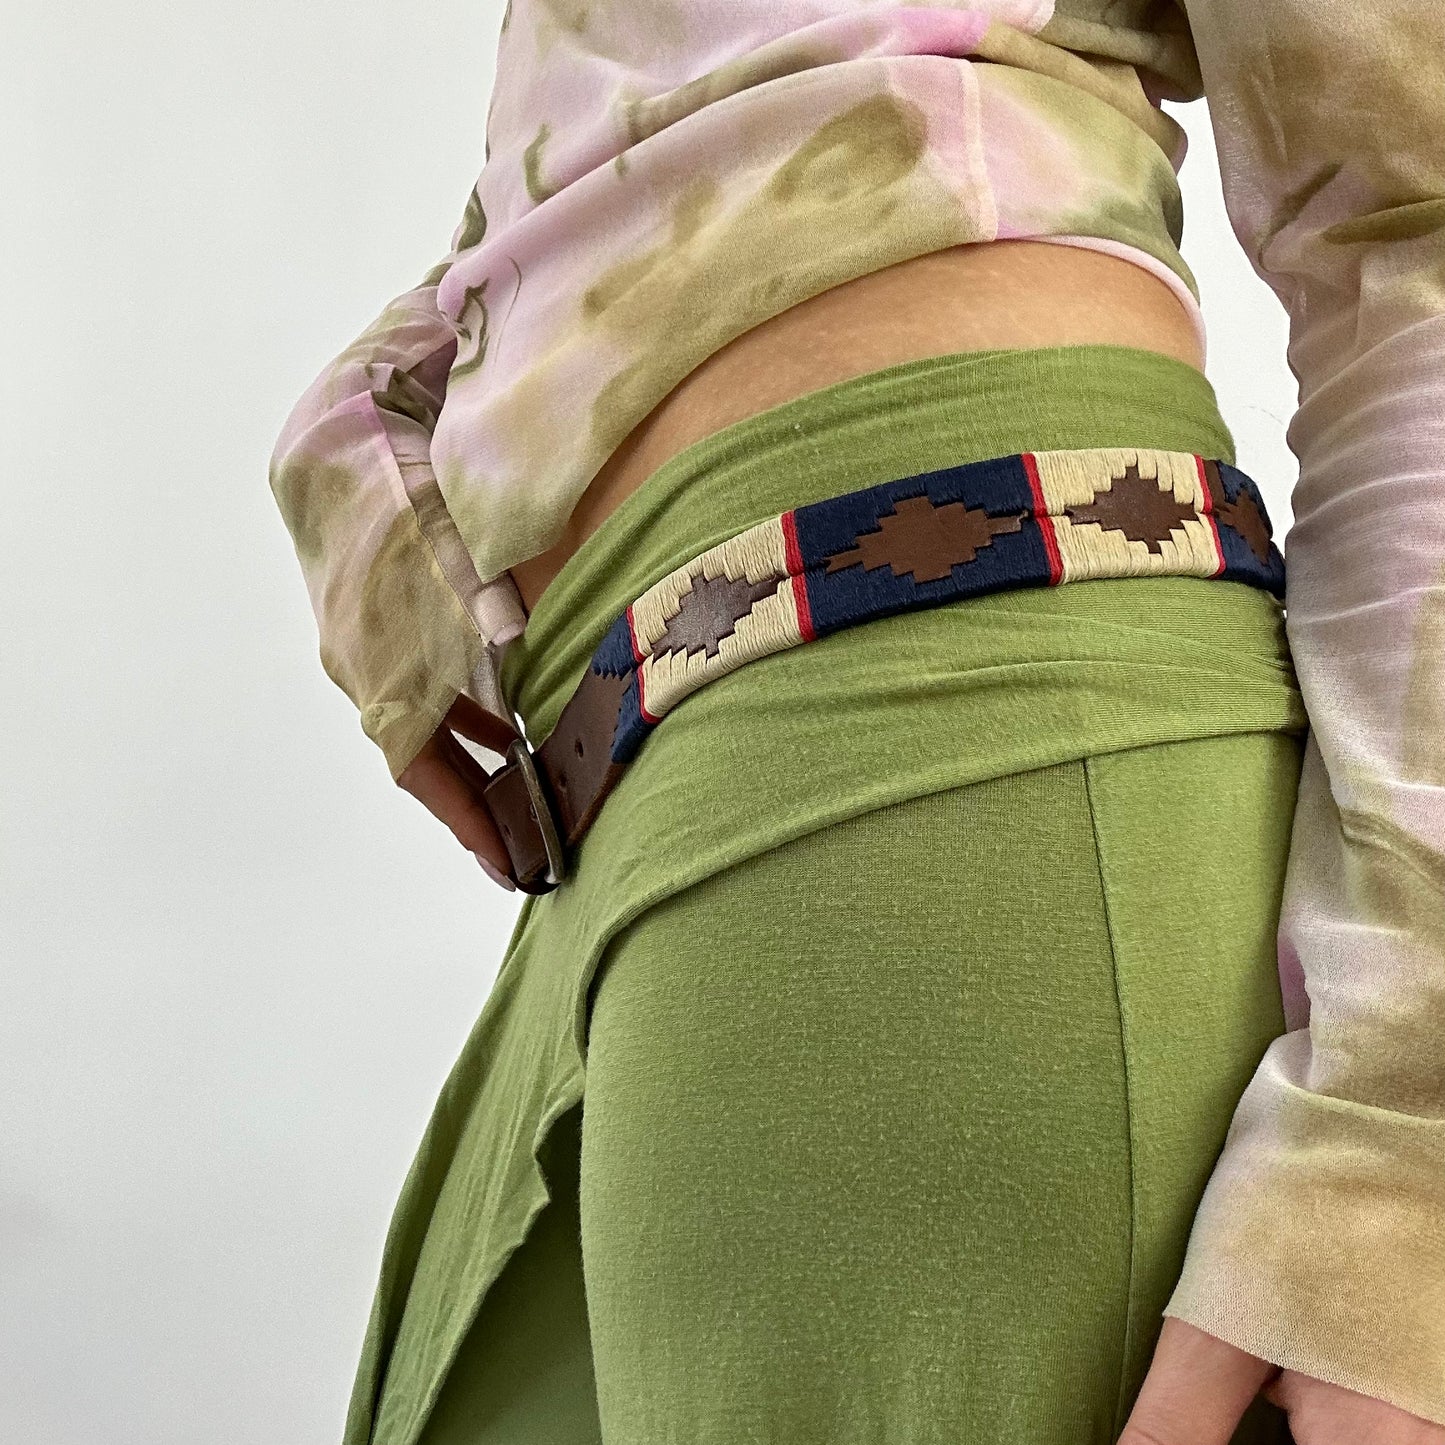 BOHO GIRL DROP | brown belt with embroidery